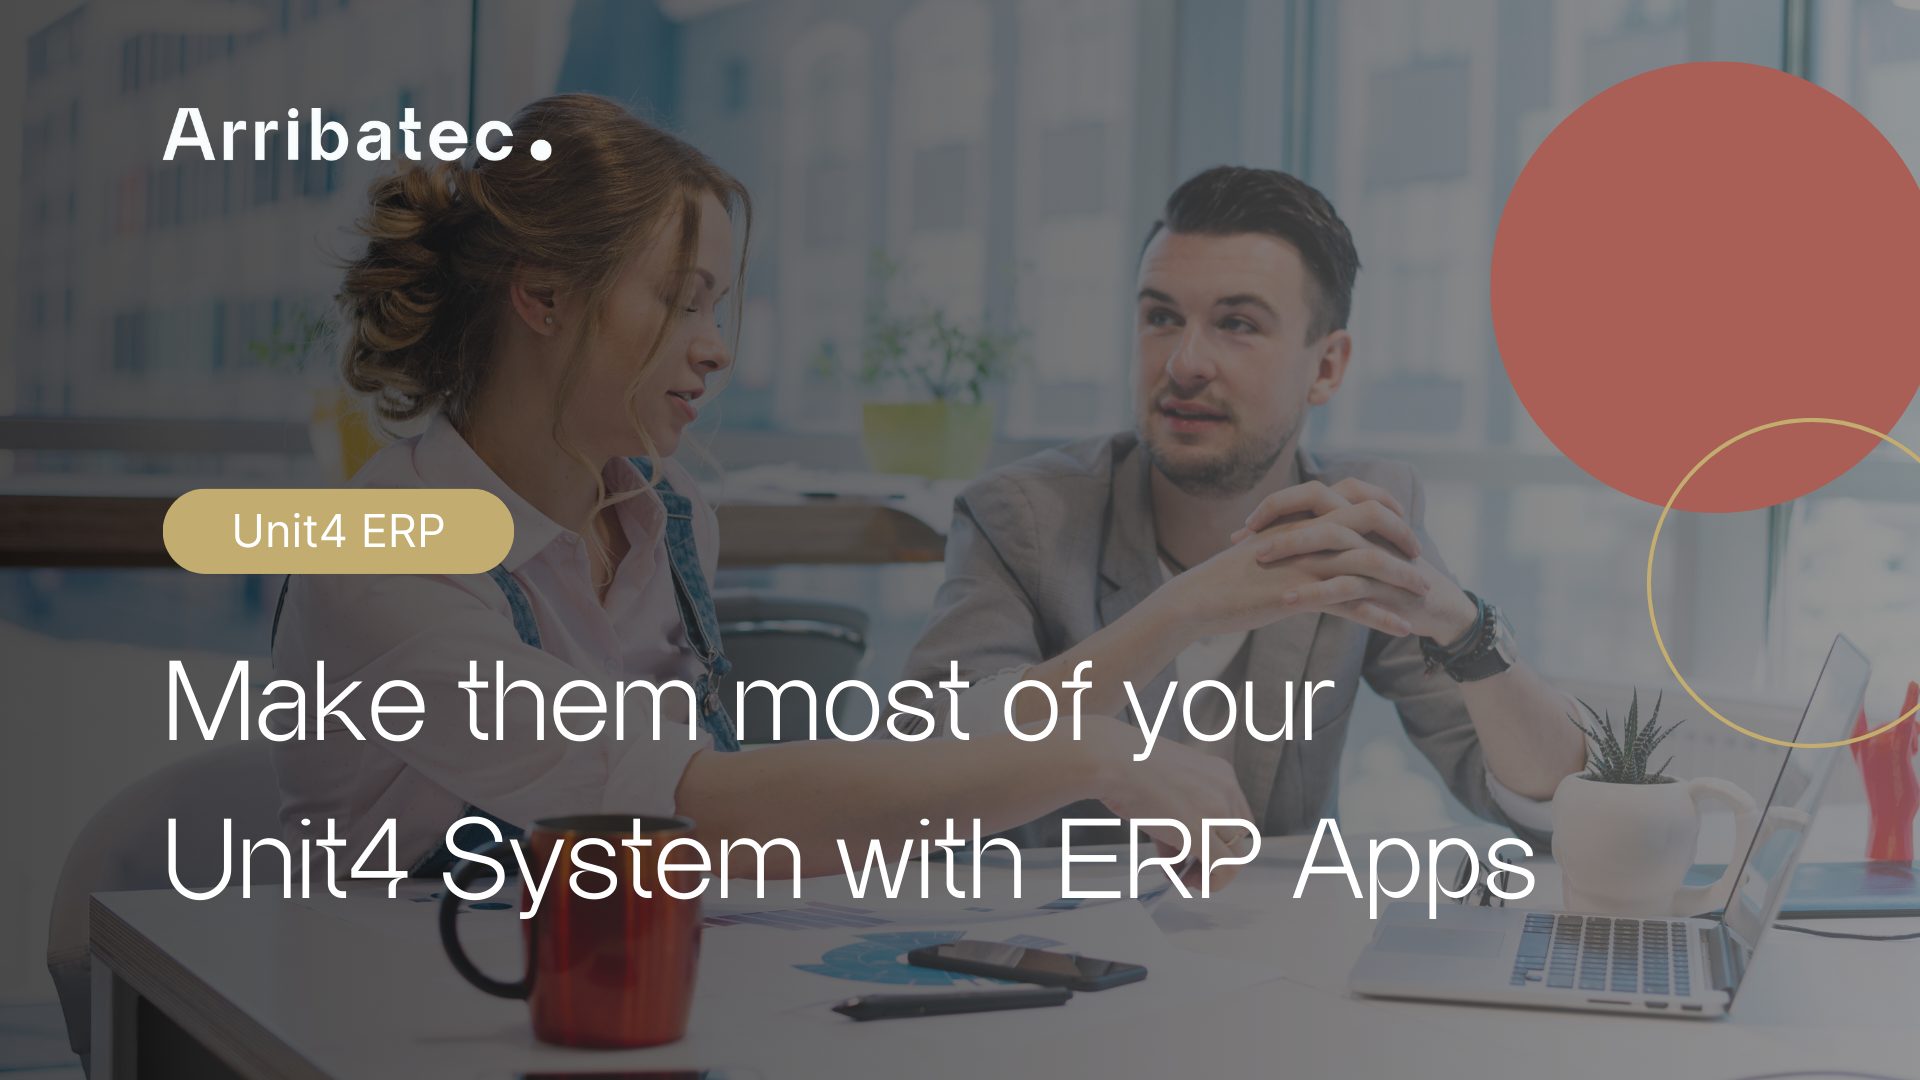 Get an integrated and scalable solution with ERP as the core engine of your business landscape.